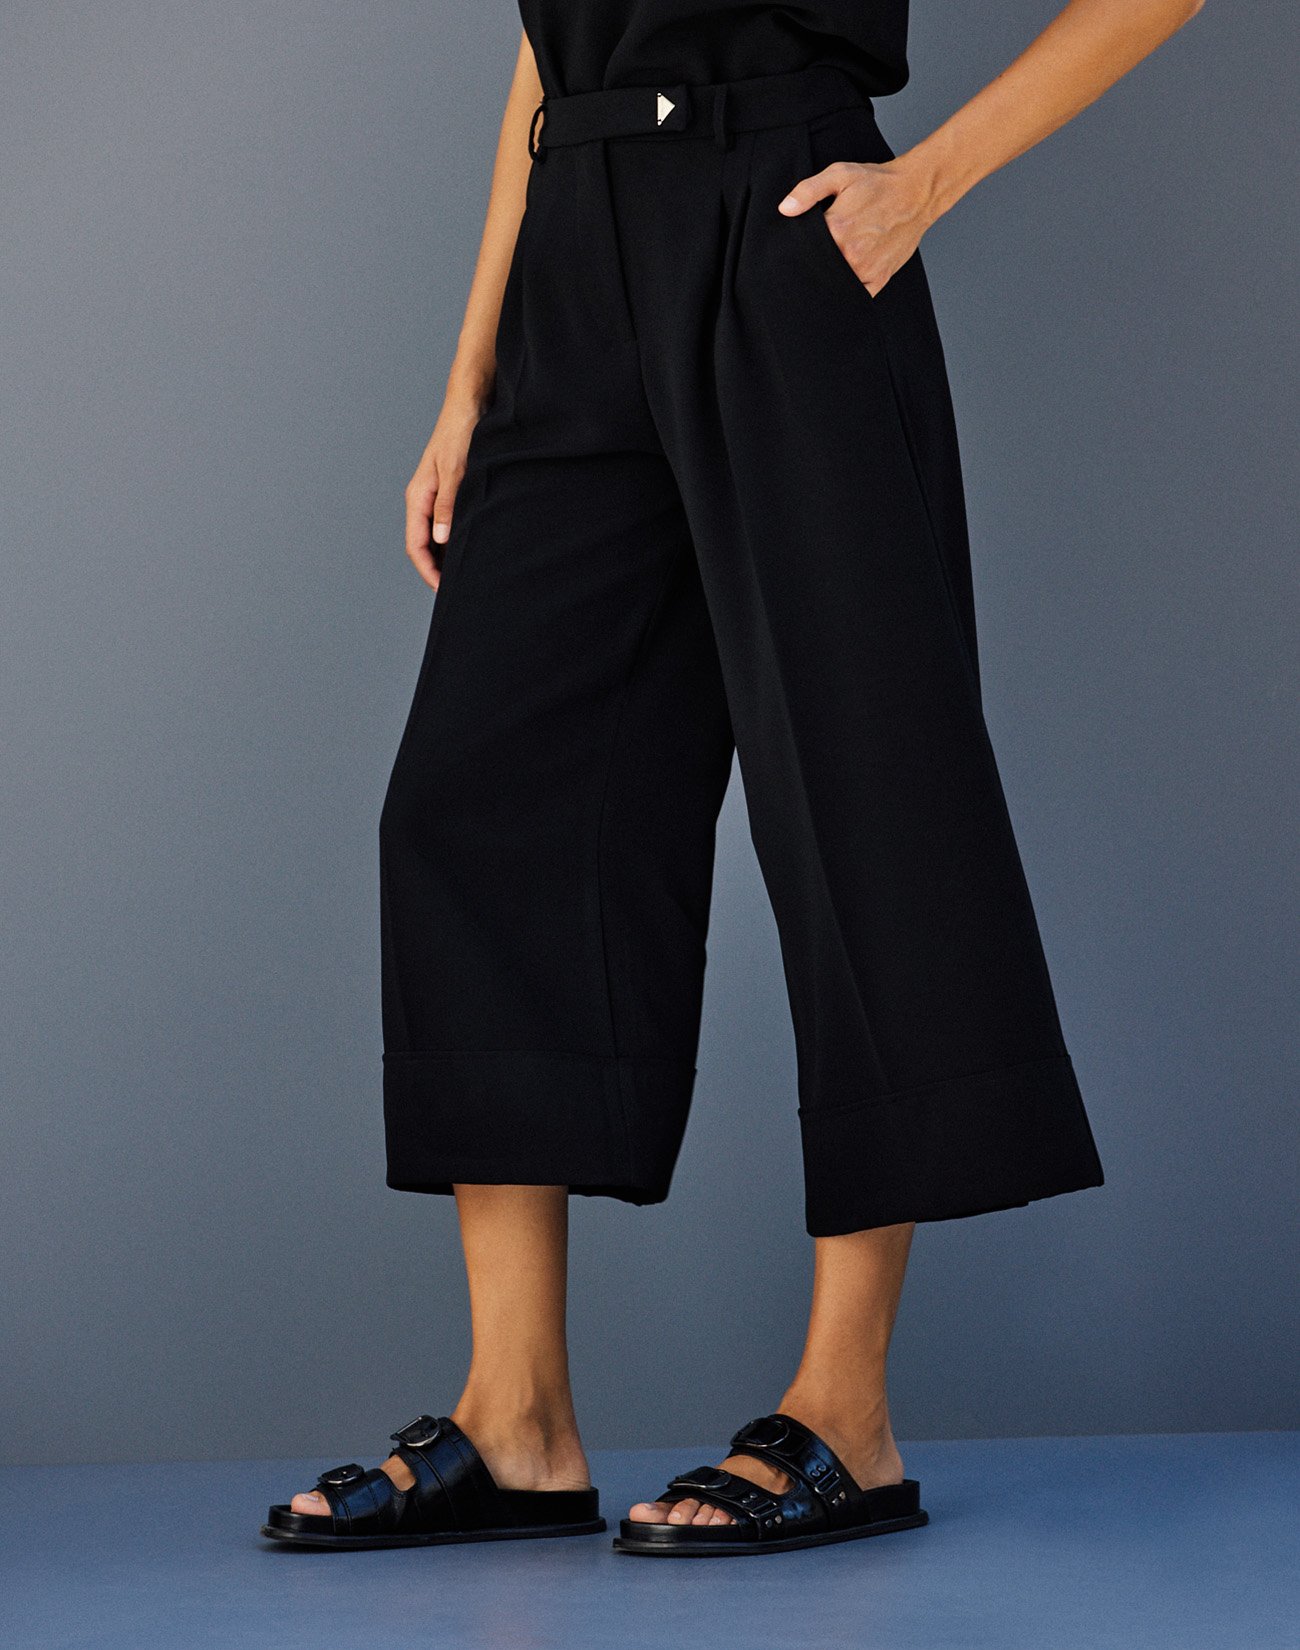 Turn up culotte trousers